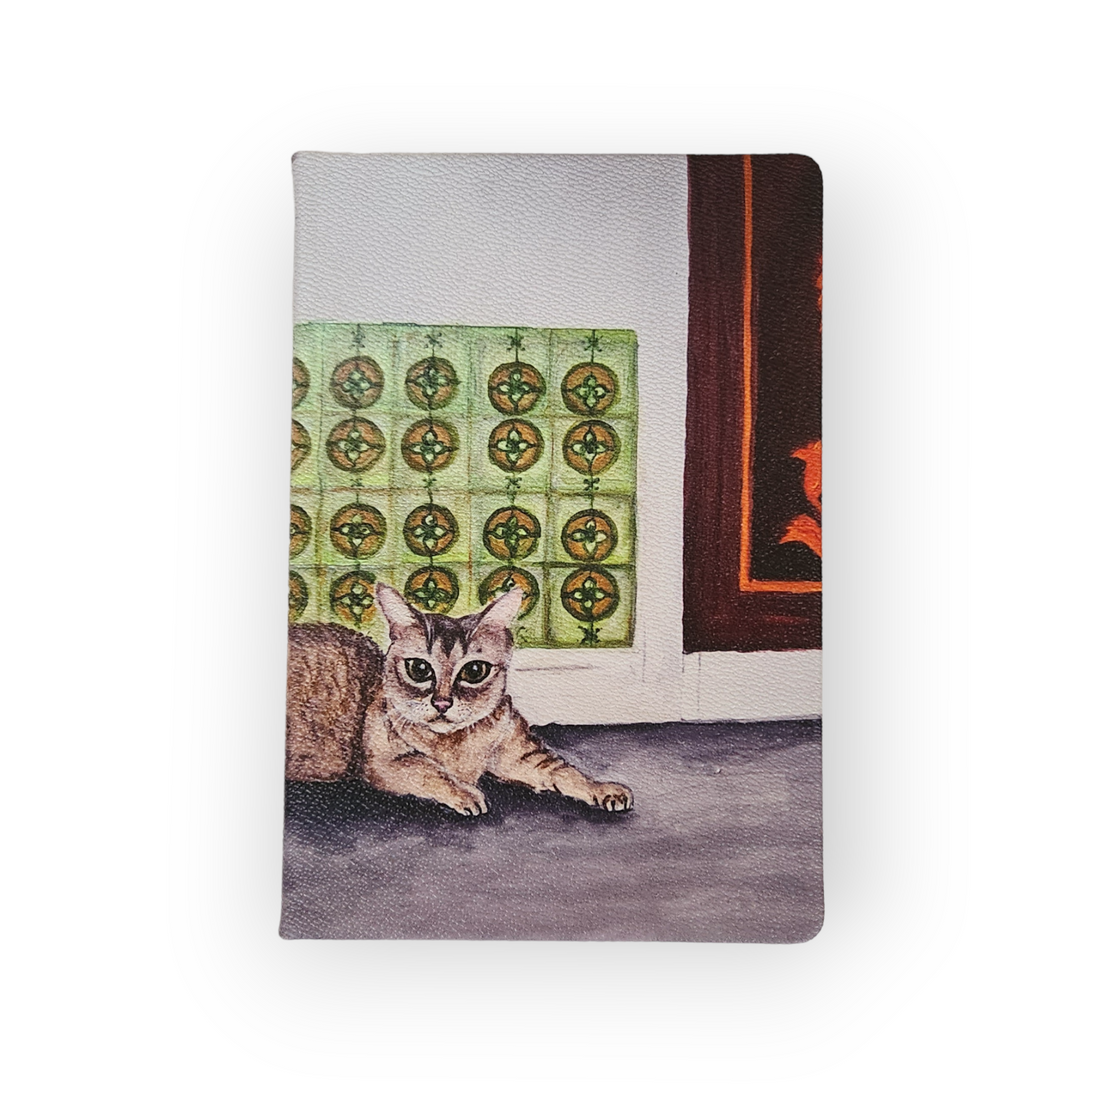 Pintu Pagar Cat, The Singapore Collection, A5 Hardcover Diary, Lined